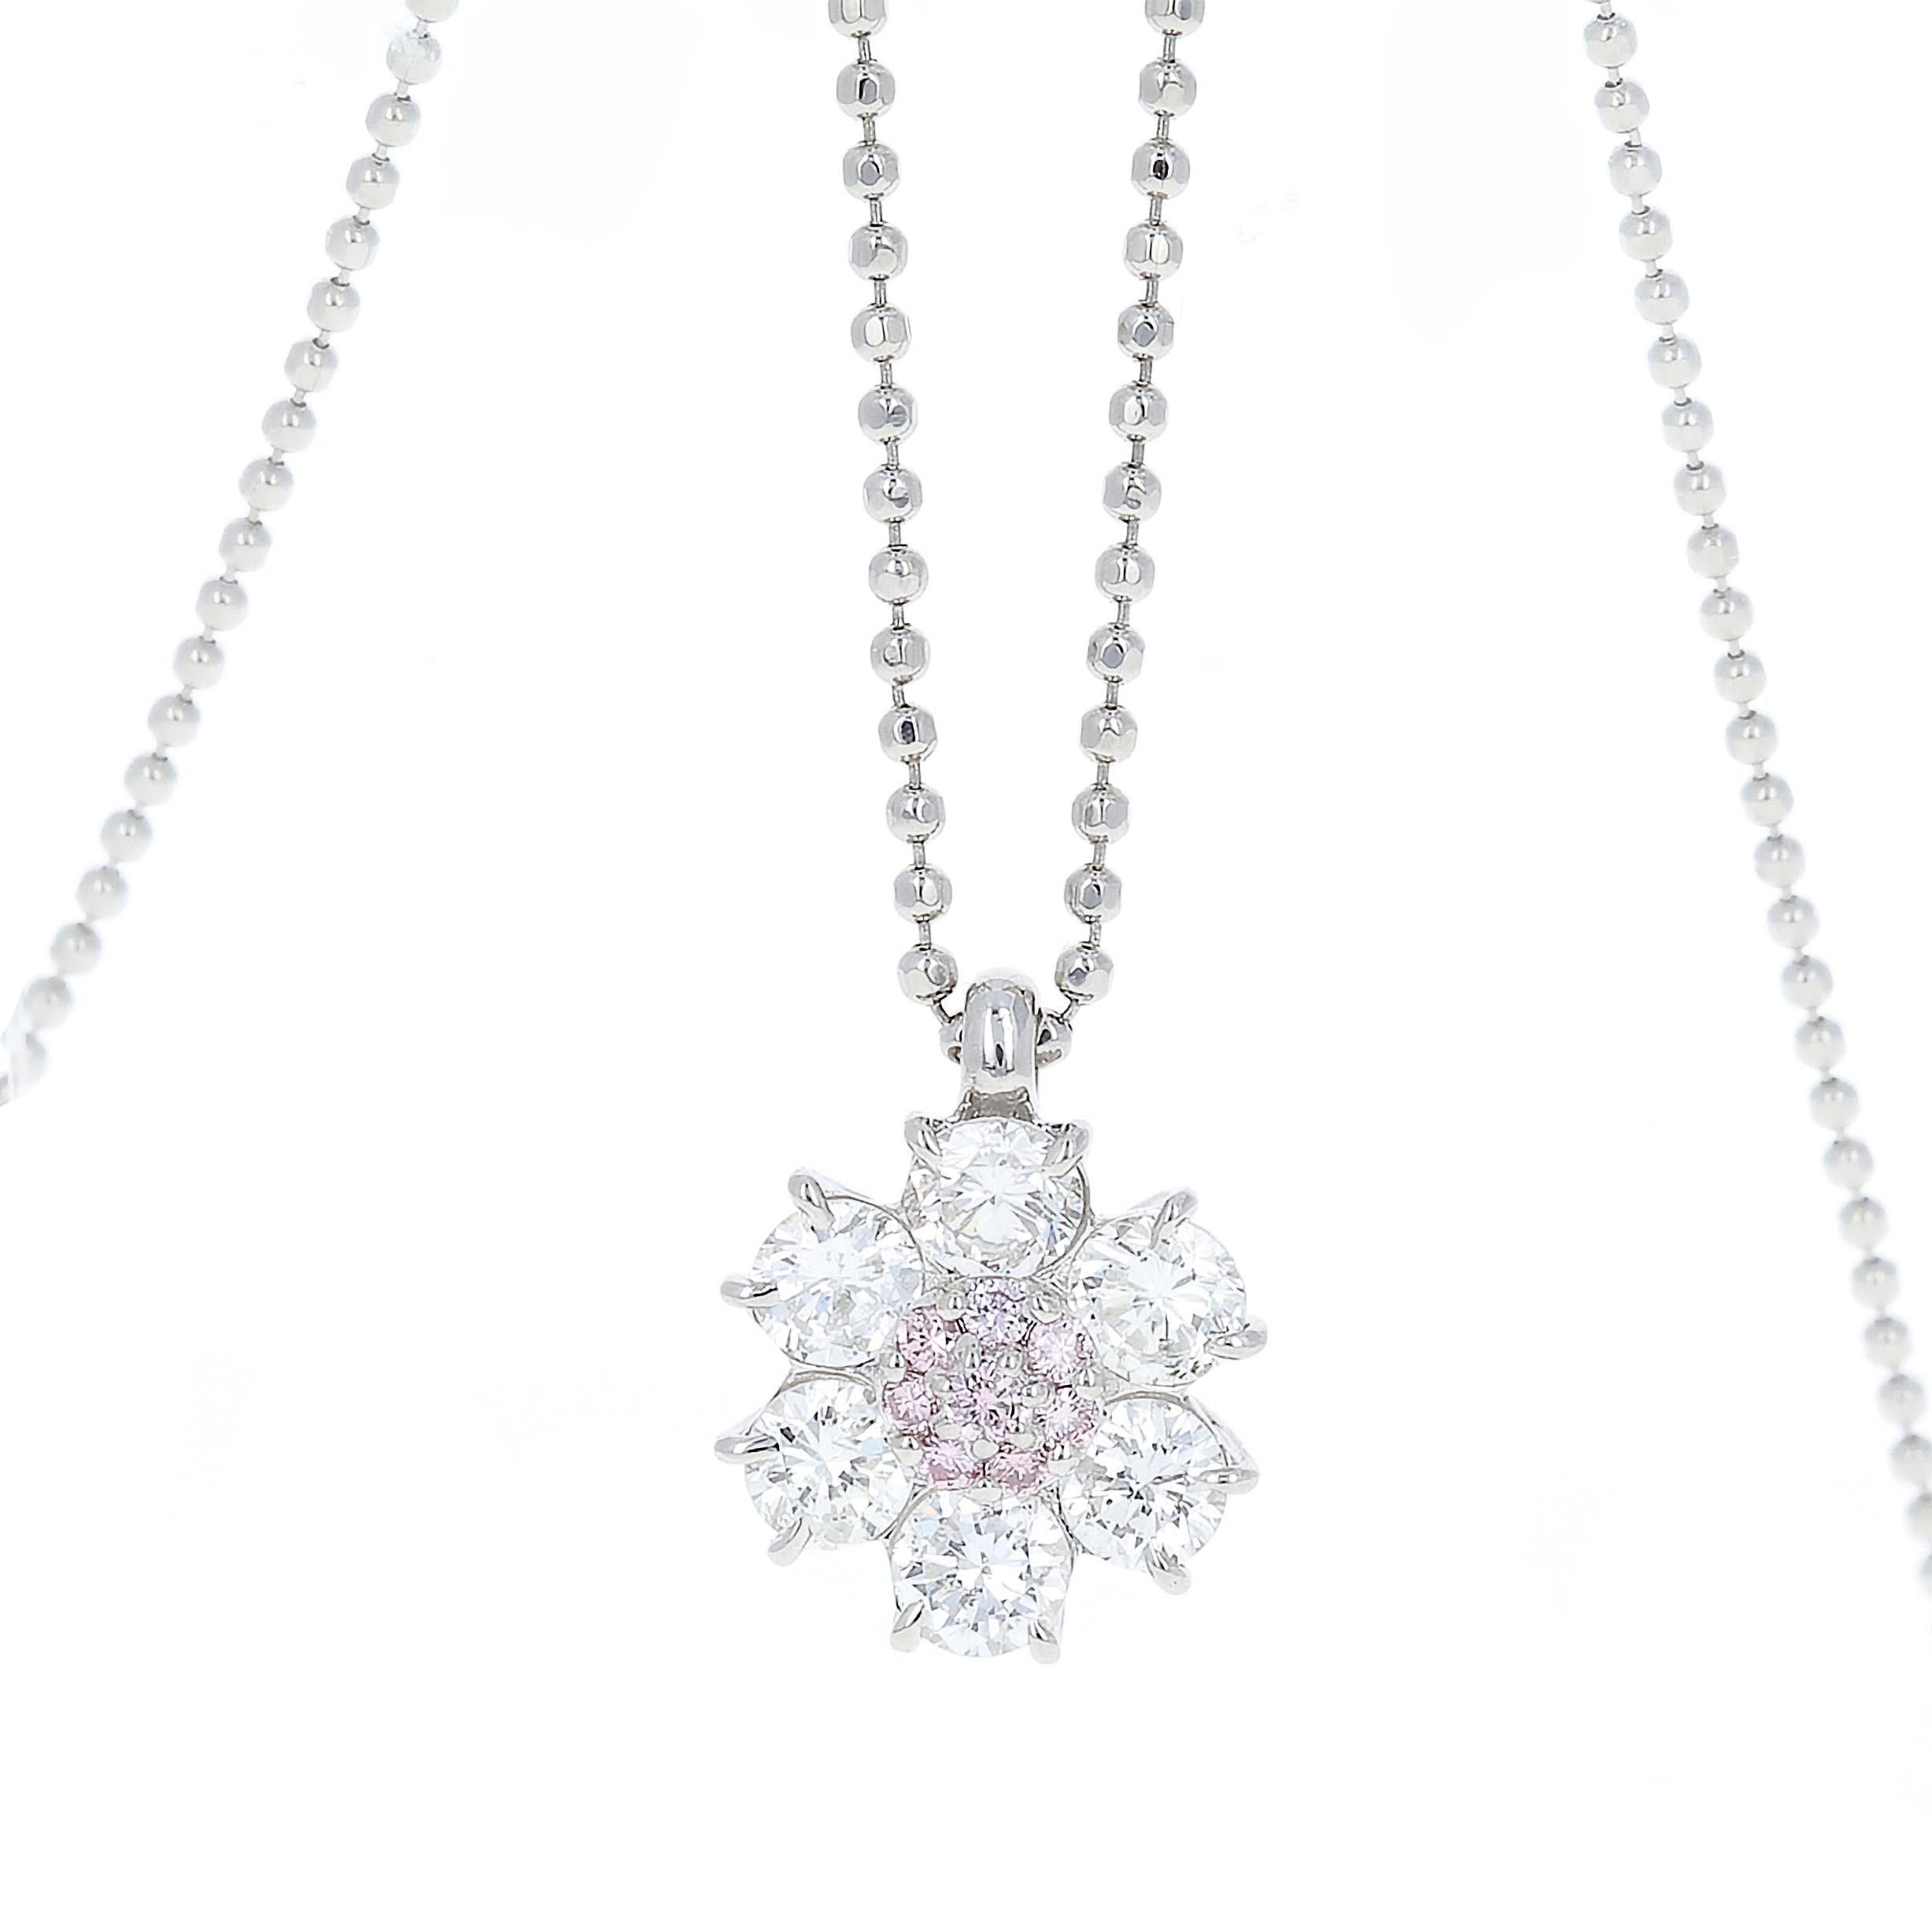 Platinum diamond flower pendant with pink and white diamonds. 
There is 0.07 carats of natural pink diamonds and 0.95 carats total weight in white diamonds.

The chain is 16 inches in length